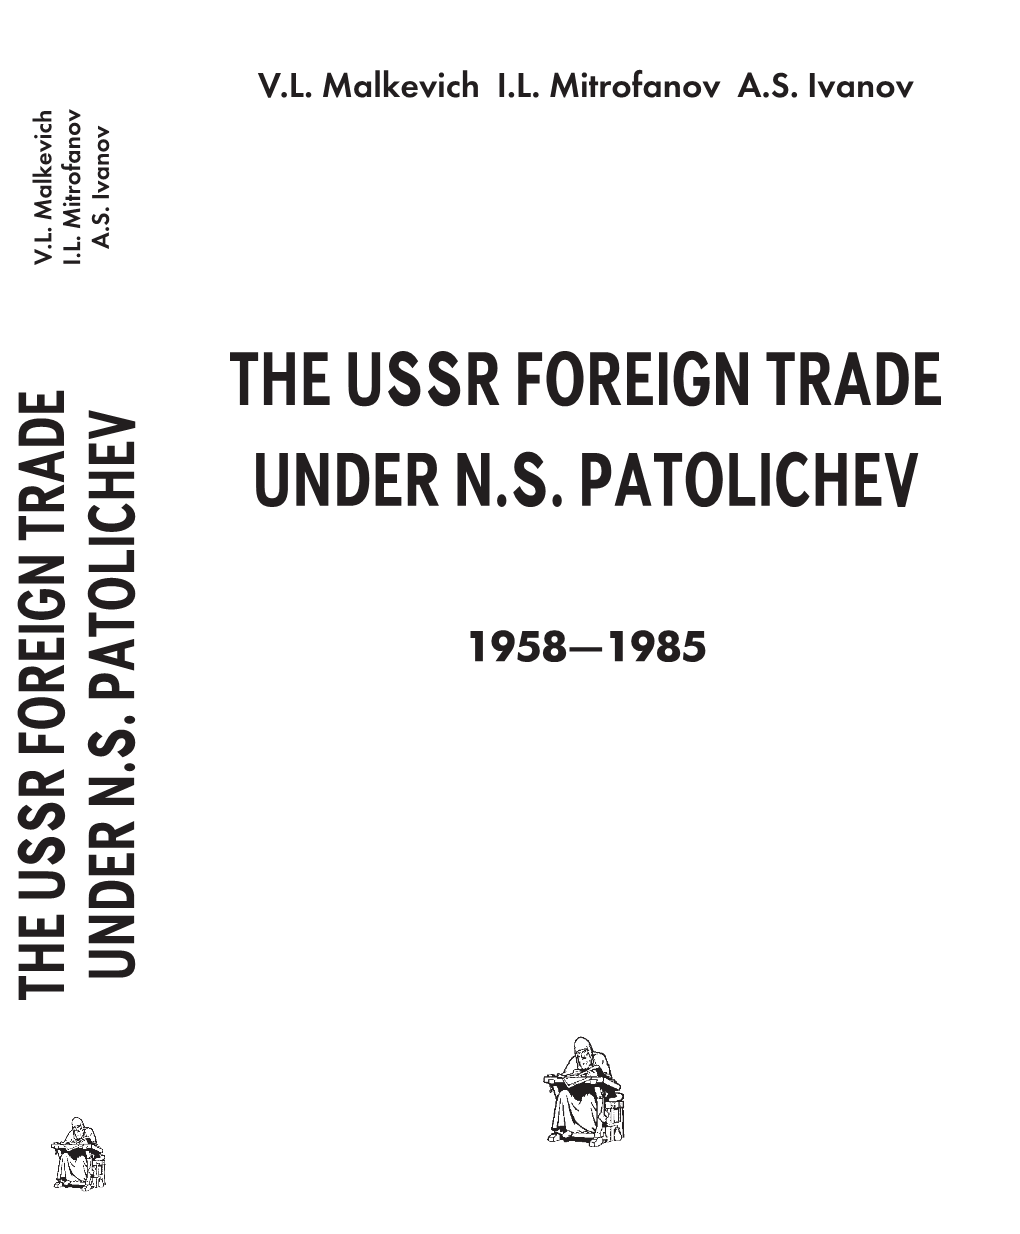 The Ussr Foreign Trade Under N.S. Patolichev